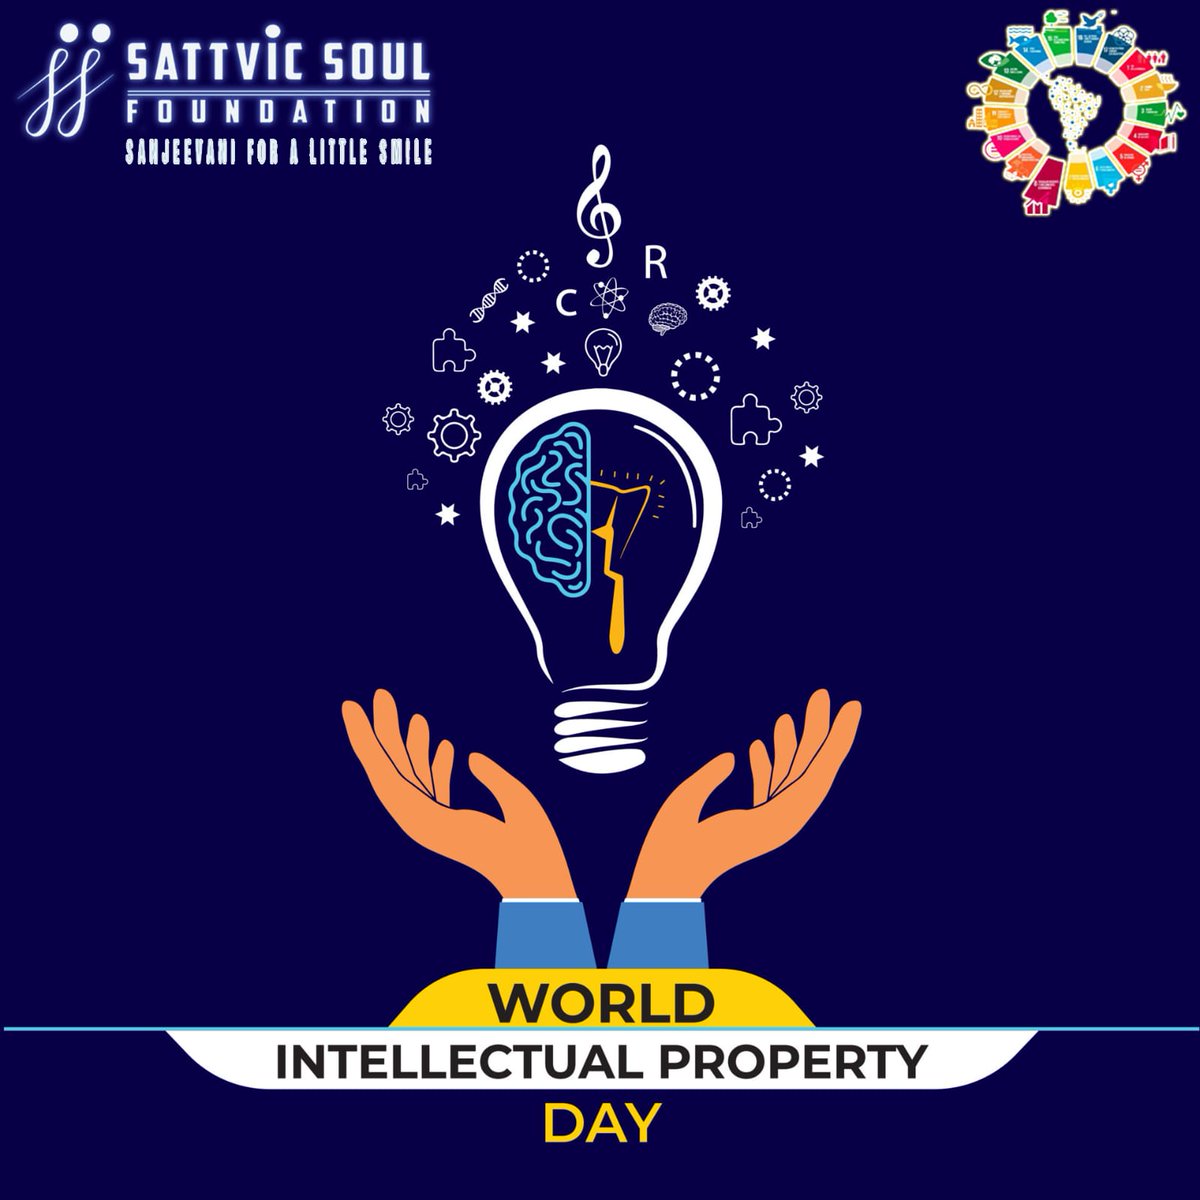 Happy World Intellectual Property Day from Art of Giving! Let's recognize the importance of intellectual property rights in fostering innovation, creativity, and economic development. Let's celebrate innovation and creativity that enrich our lives. 💫

#IntellectualPropertyDay